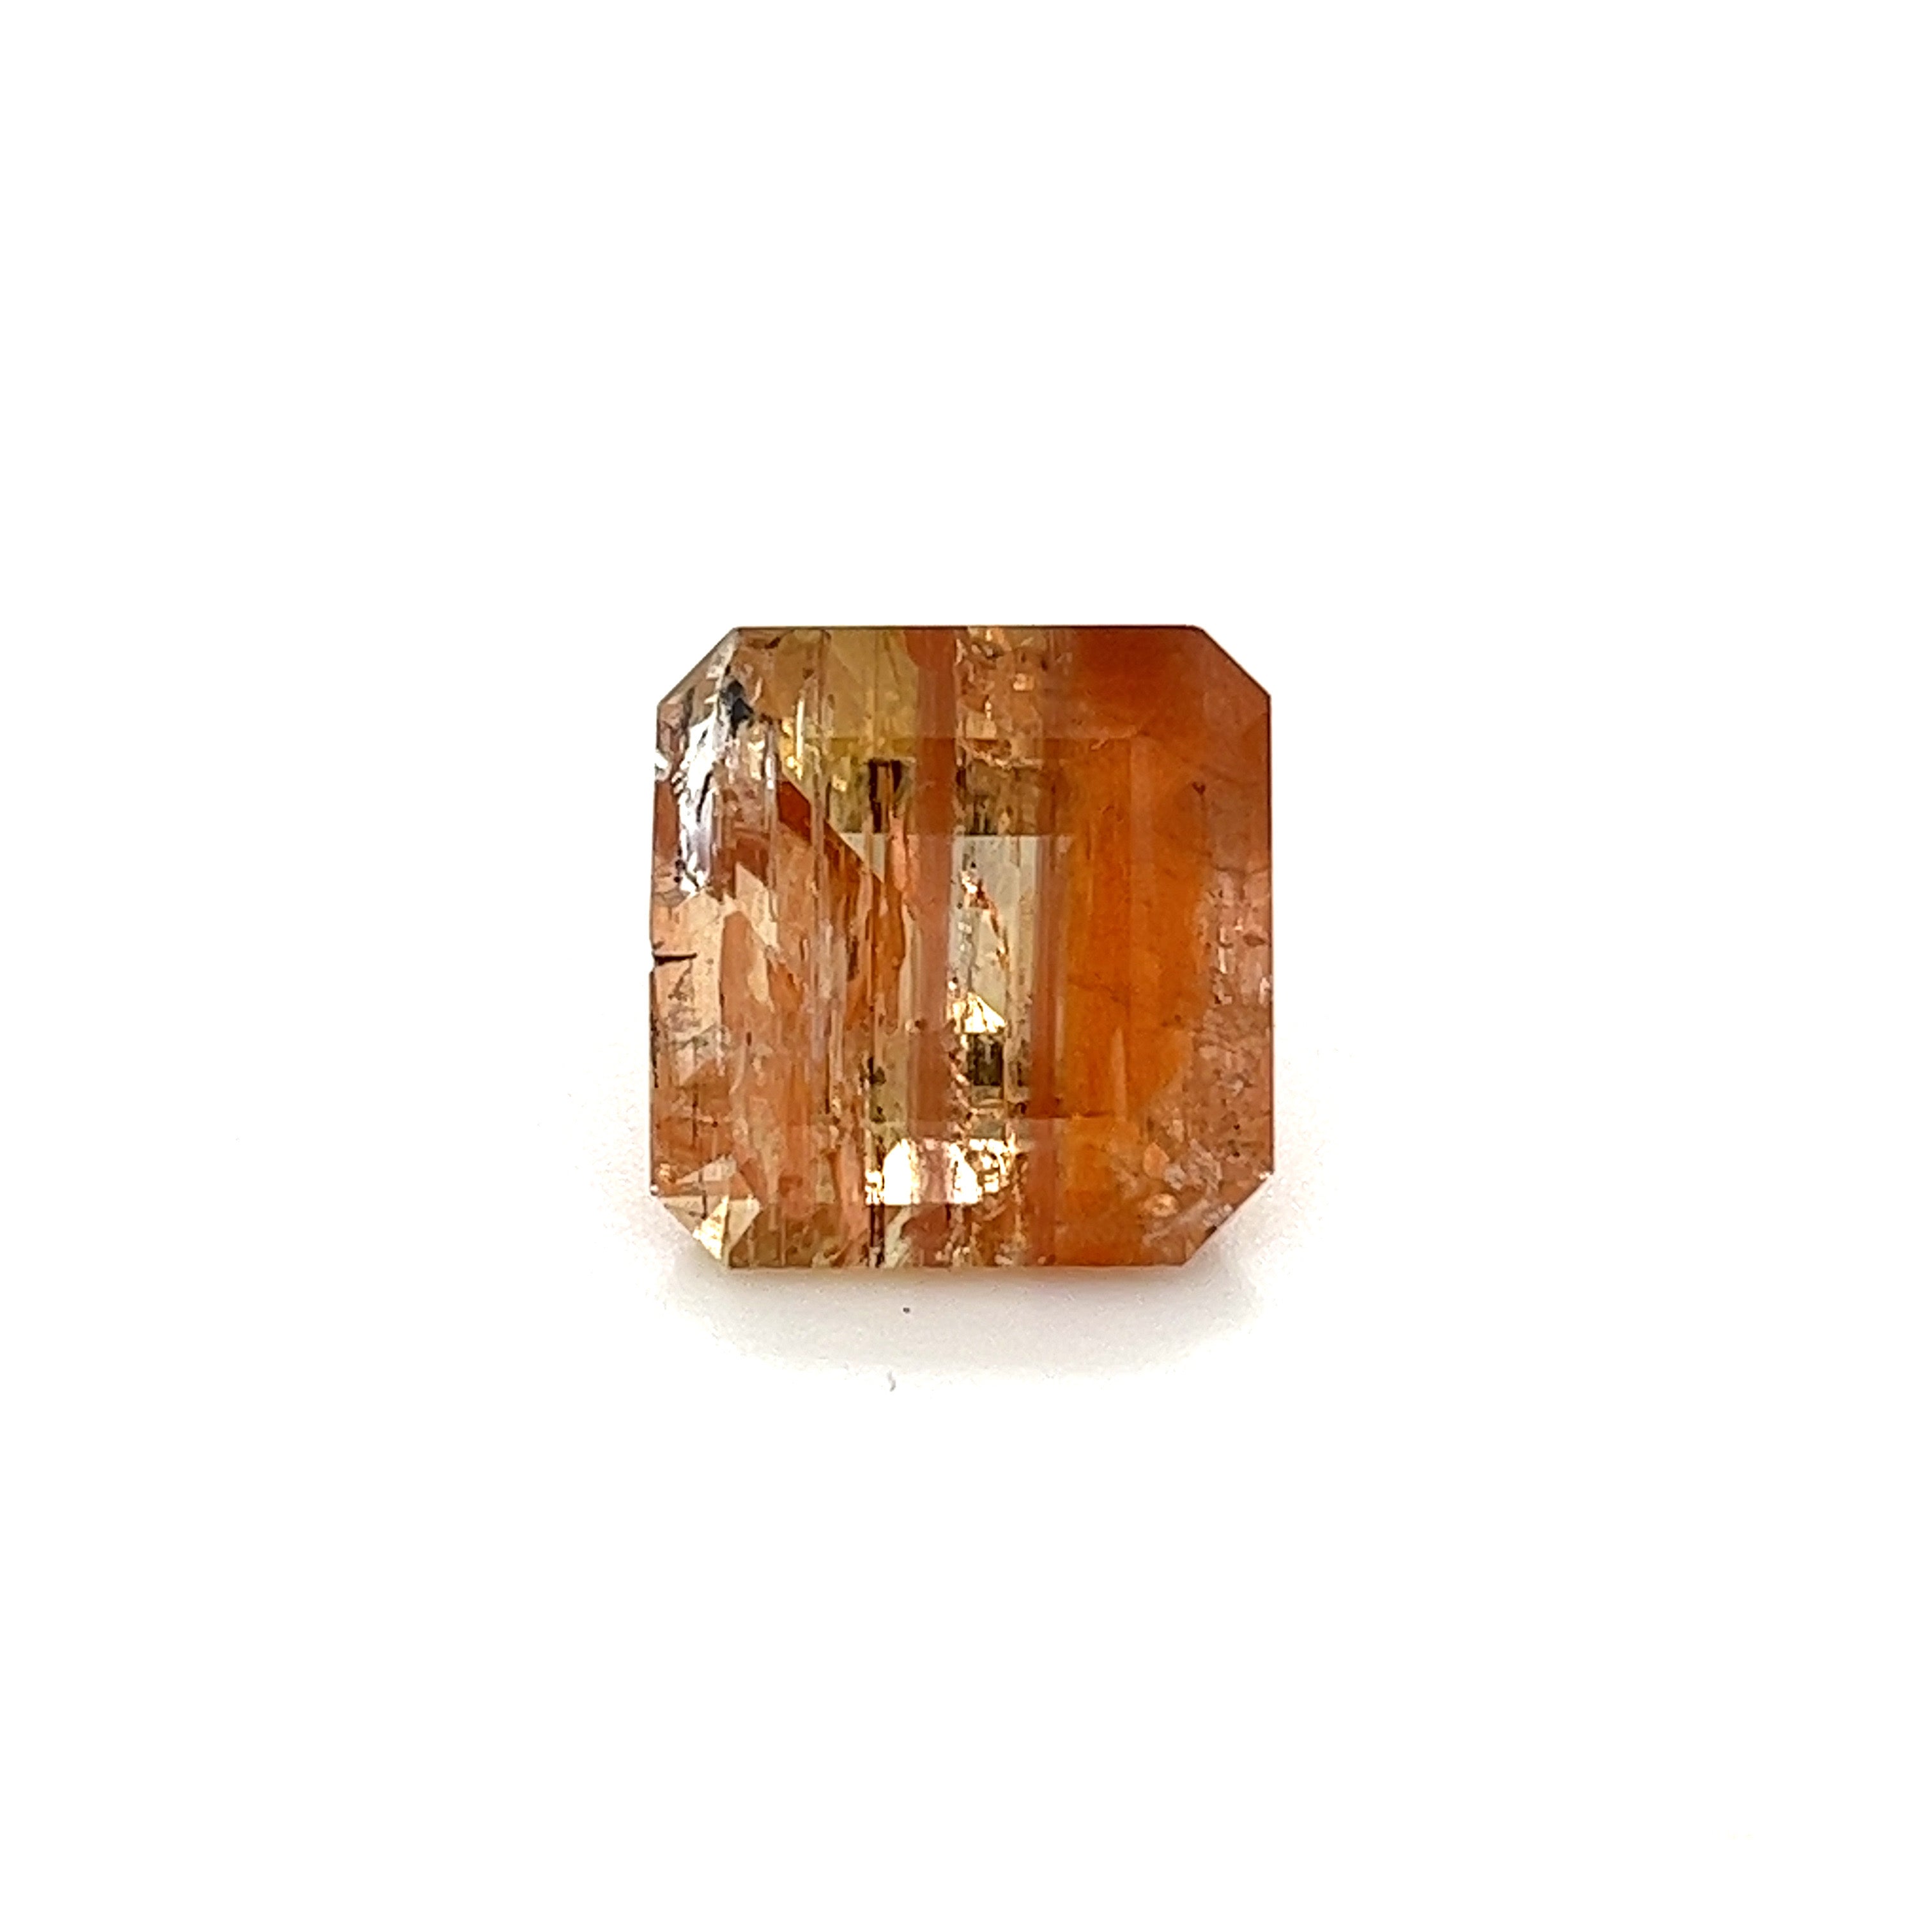 Scapolite Gemstone; Natural Untreated Tanzanian Copper Scapolite, 7.615cts - Mark Oliver Gems